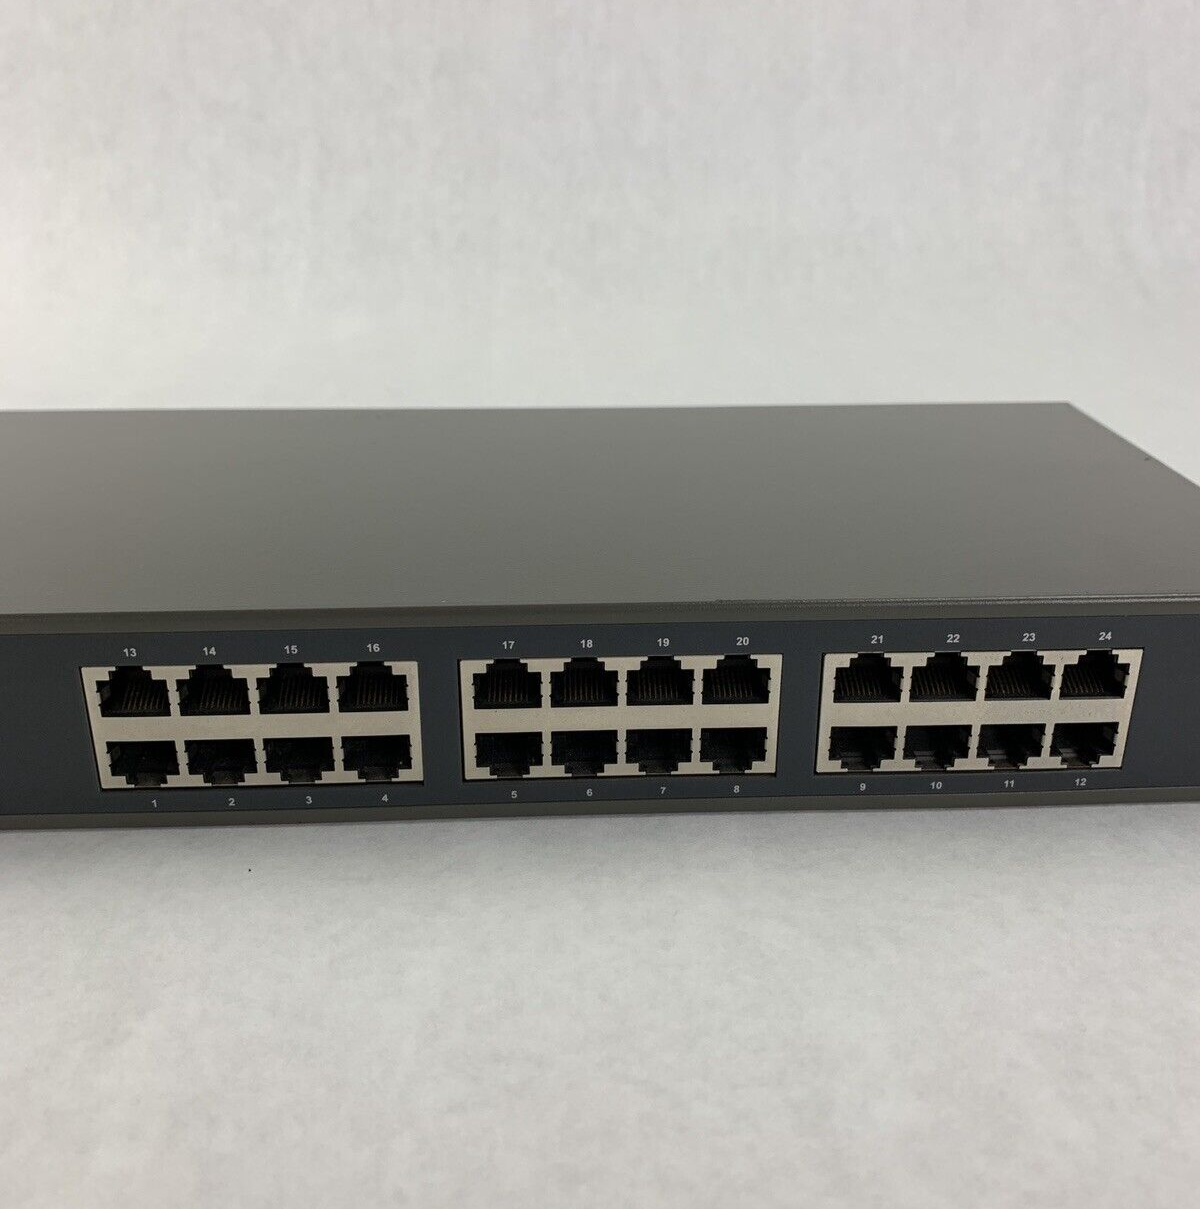 Trendnet Fast Managed Ethernet Switch TE100-S24g